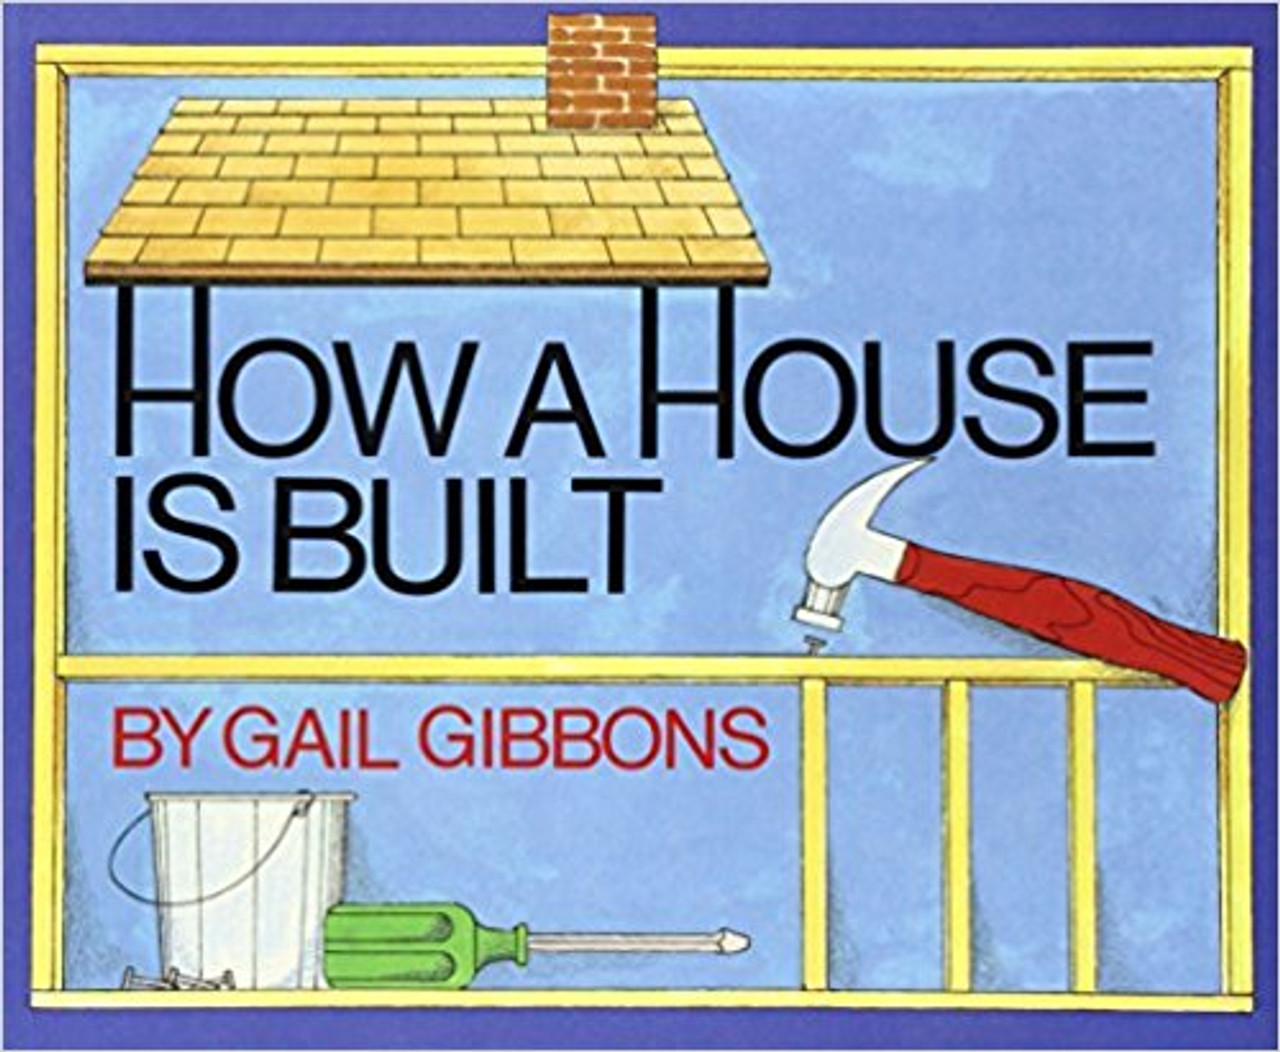 Describes how the surveyor, heavy machinery operators, carpenter crew, plumbers, and other workers build a house.